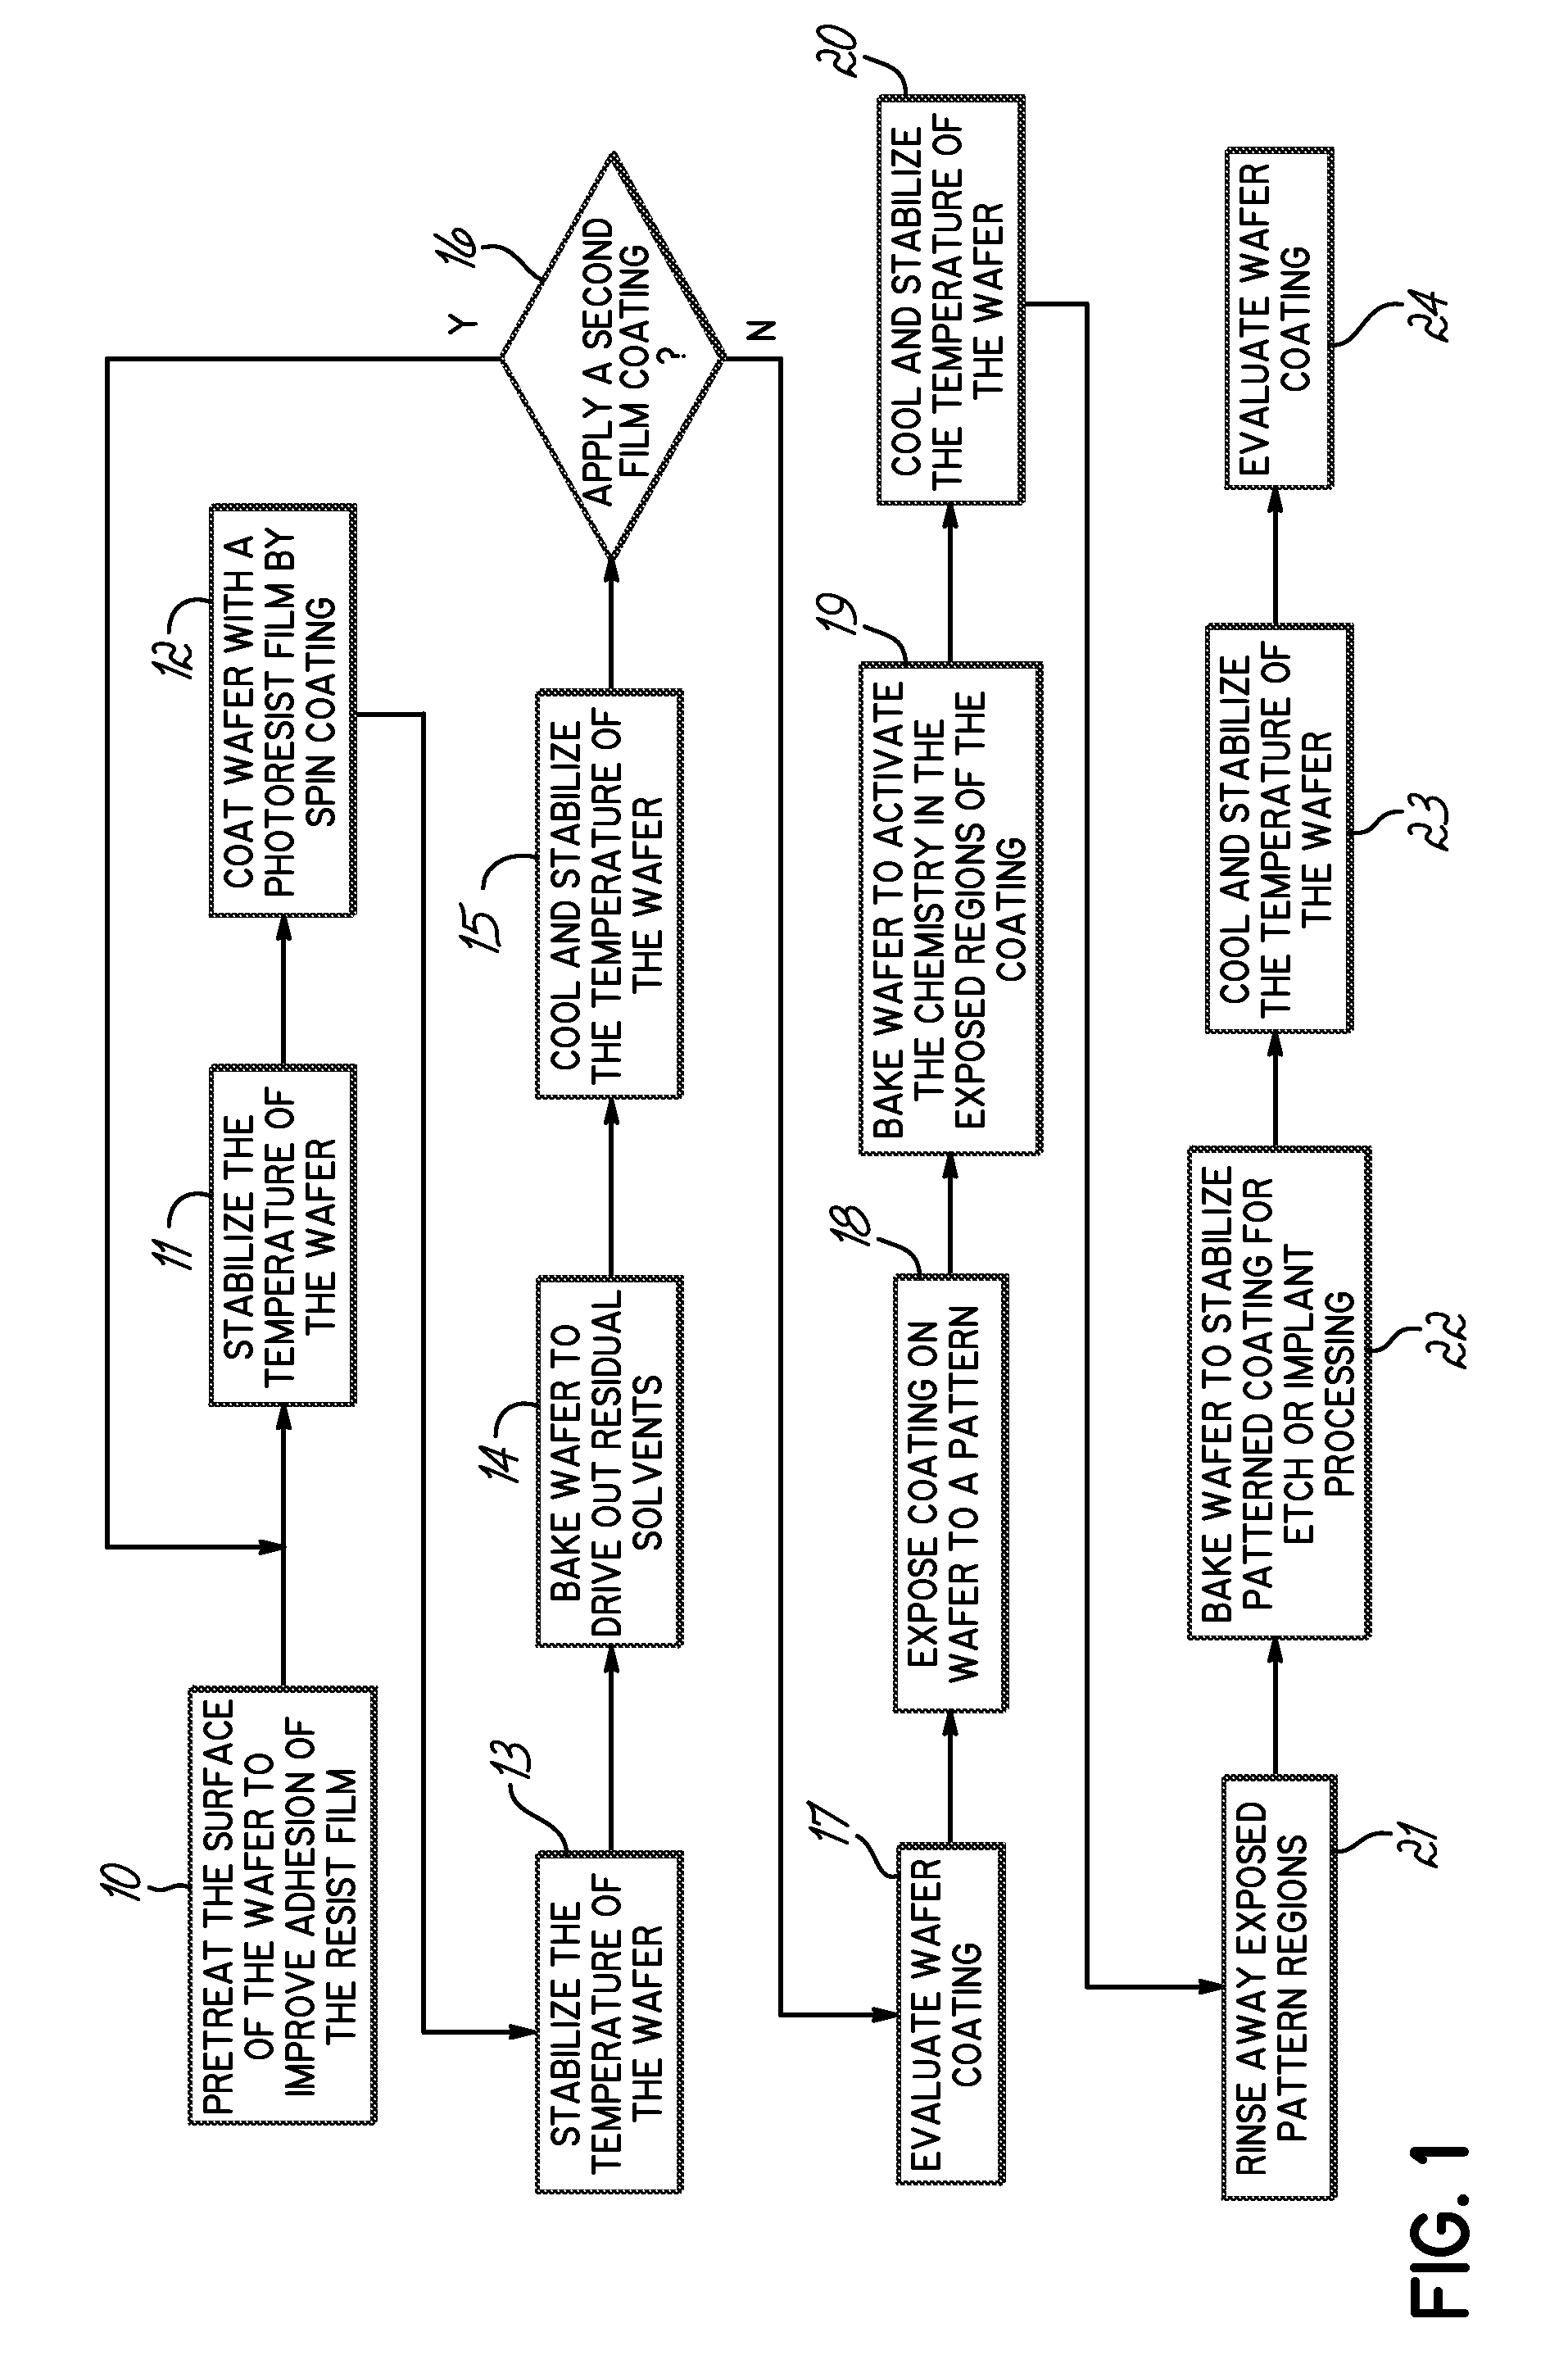 Apparatus and method for predictive temperature correction during thermal processing